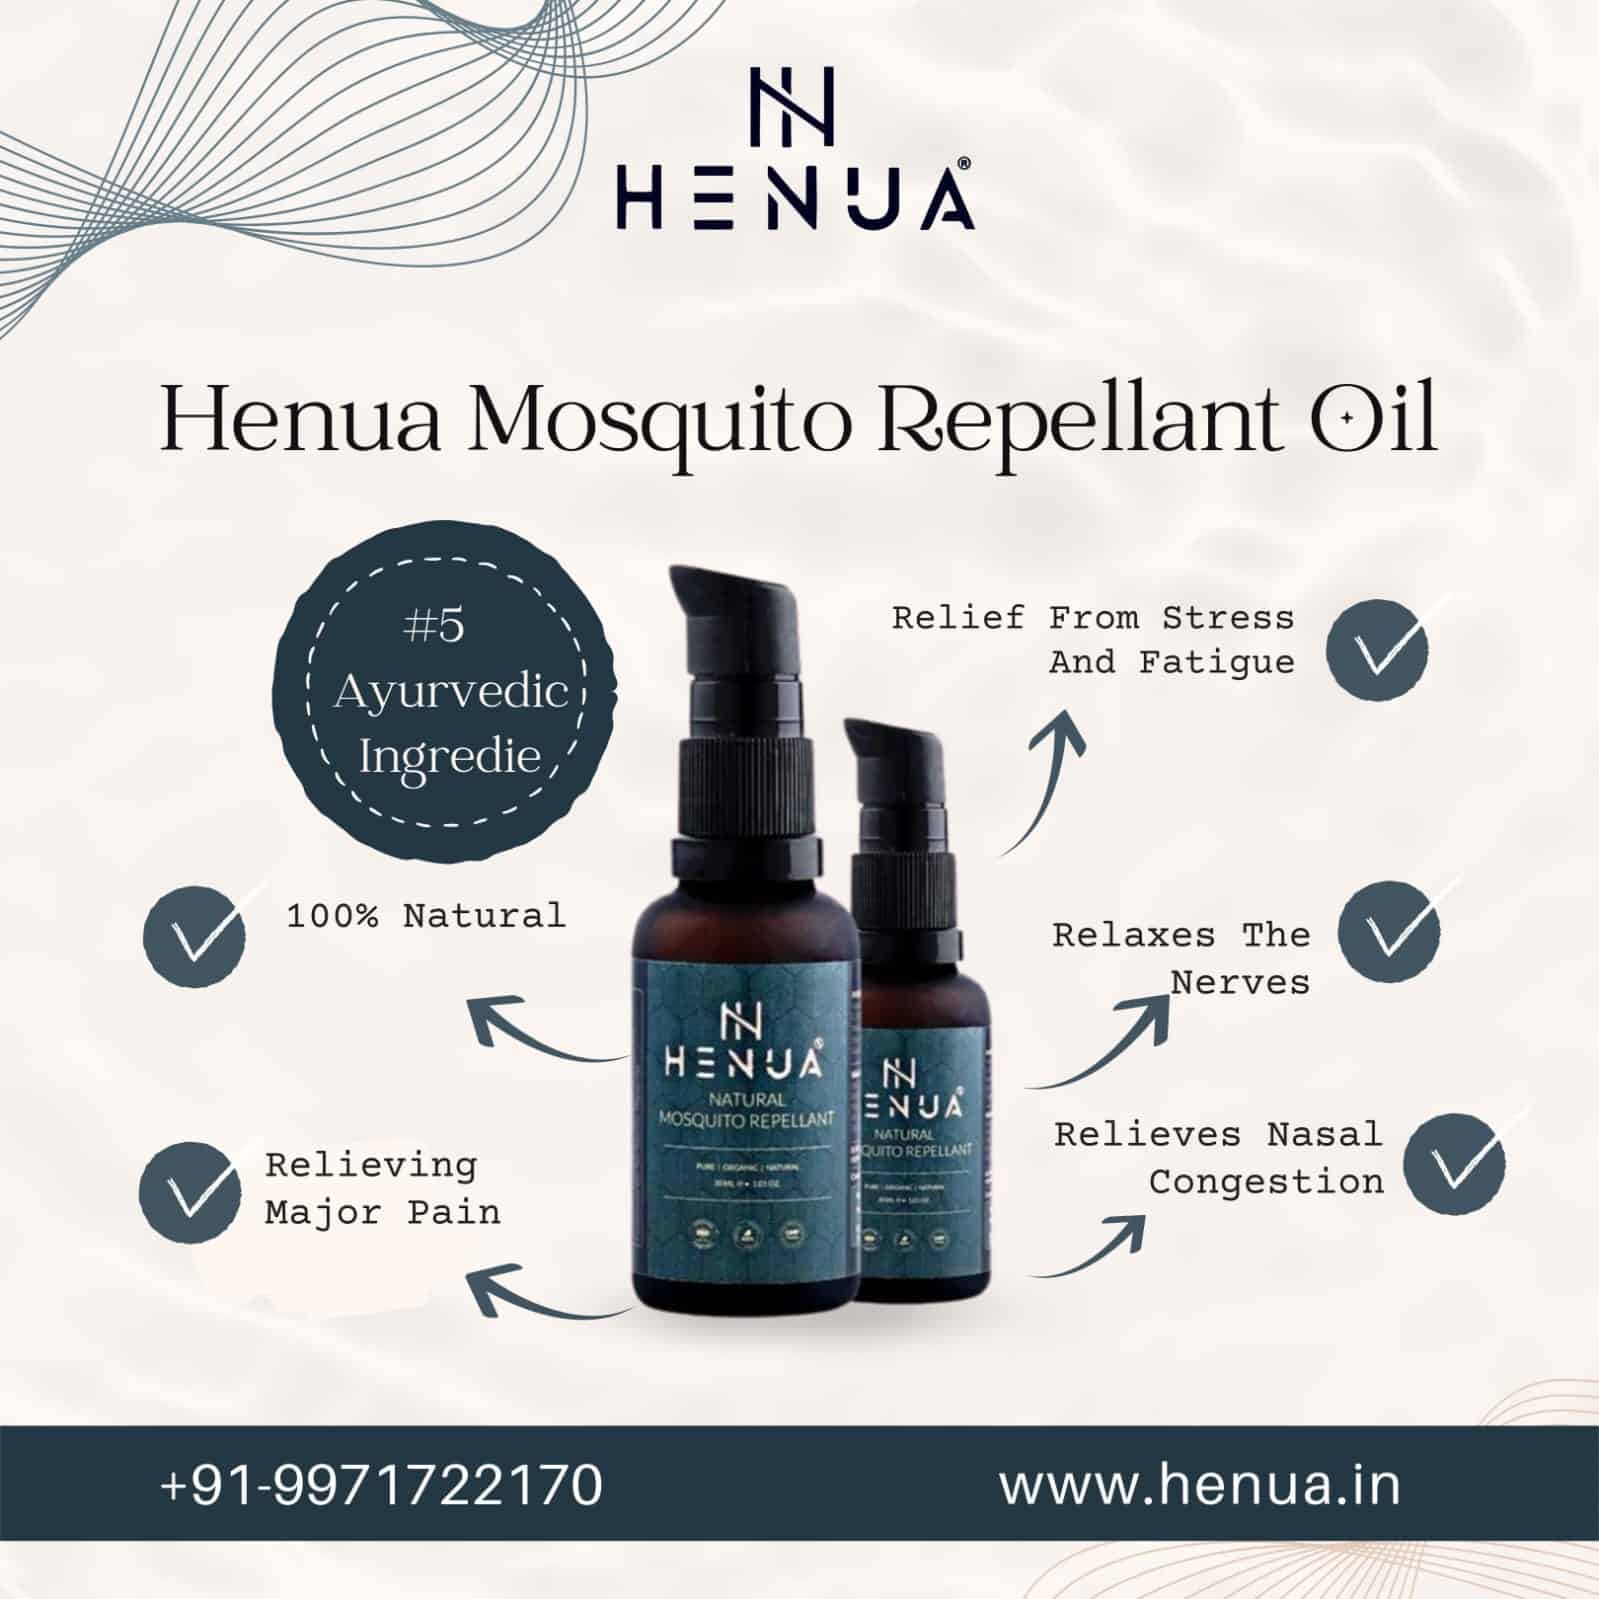 100-Natural-Mosquito-Repellent-Oil-From-Henua